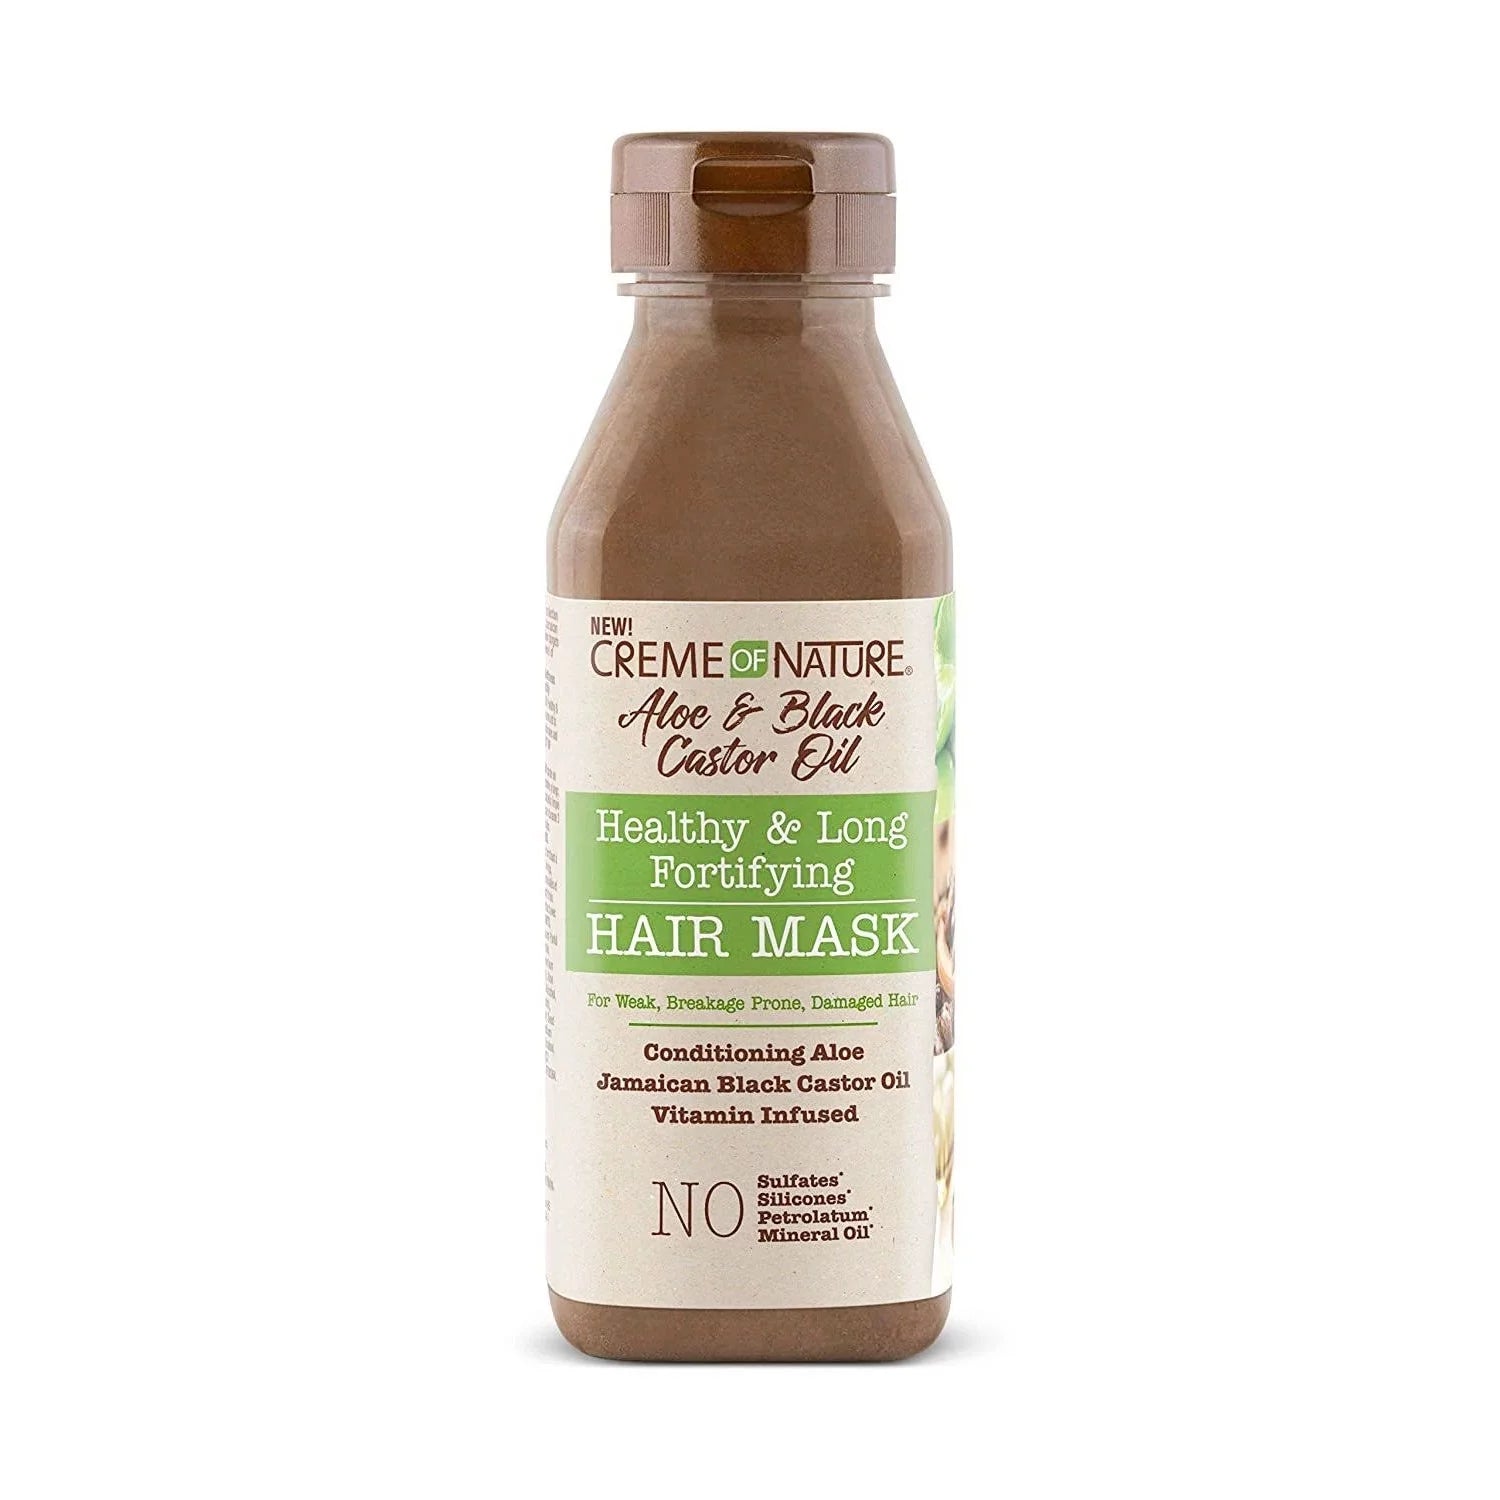 Creme Of Nature Aloe & Black Castor Oil Fortifying Hair Mask